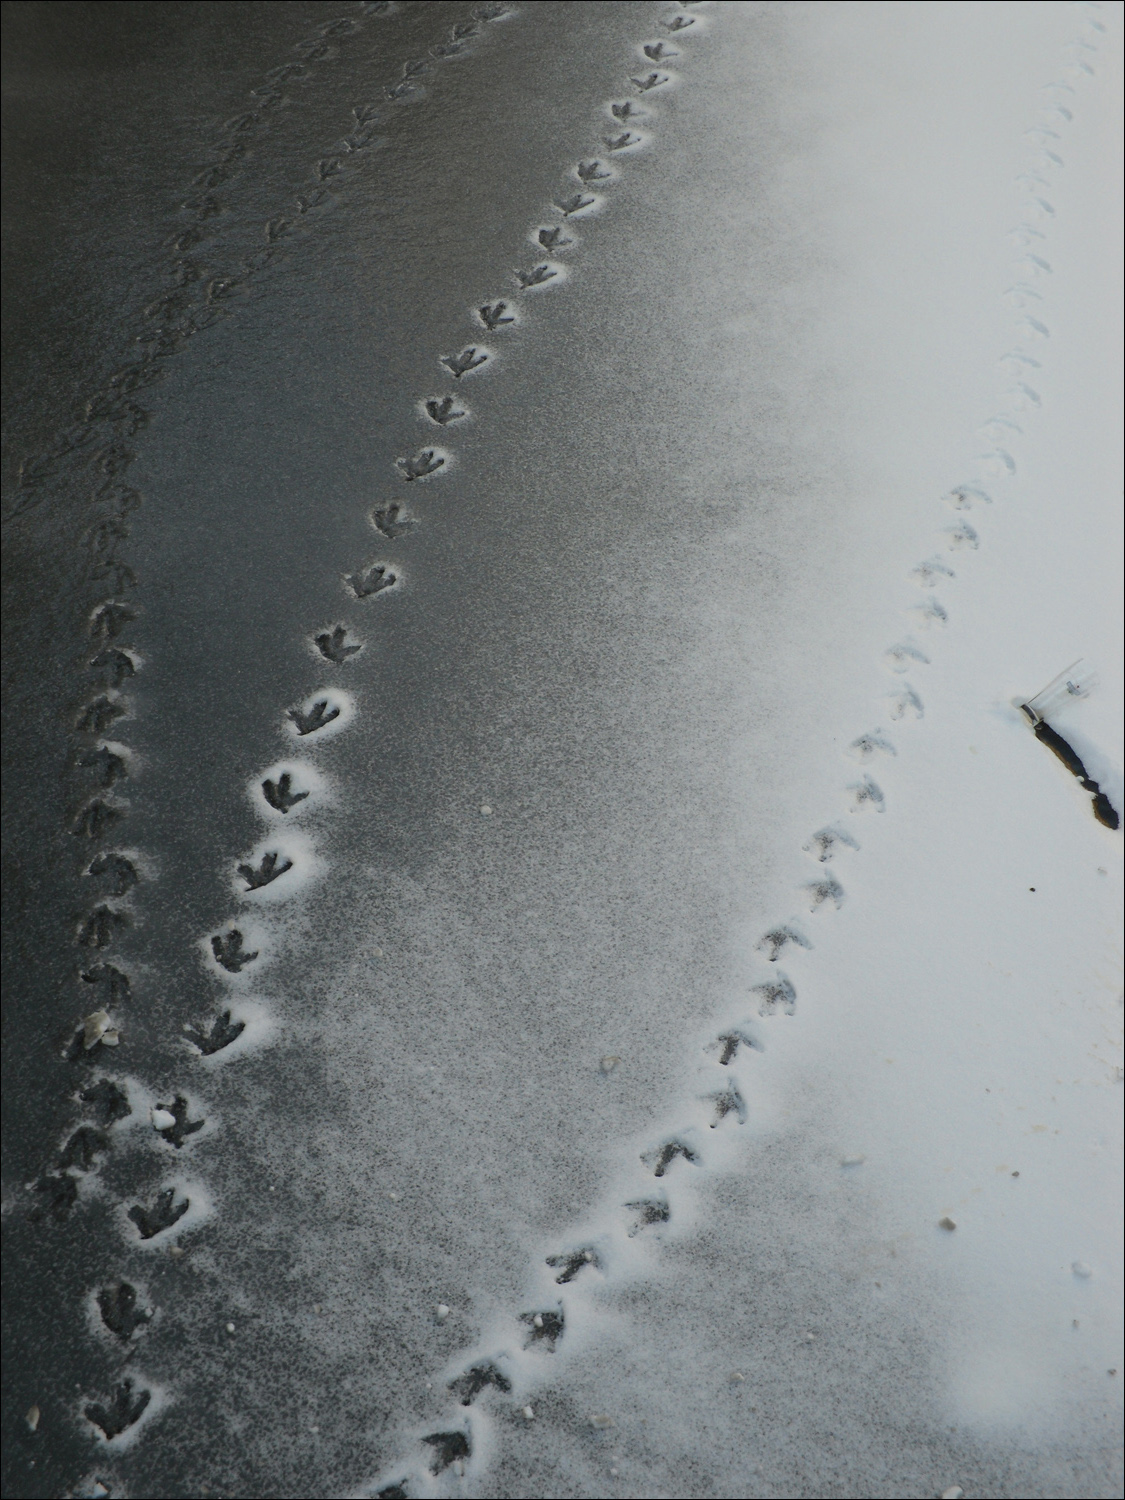 Hague-coot tracks in snow on frozen lake